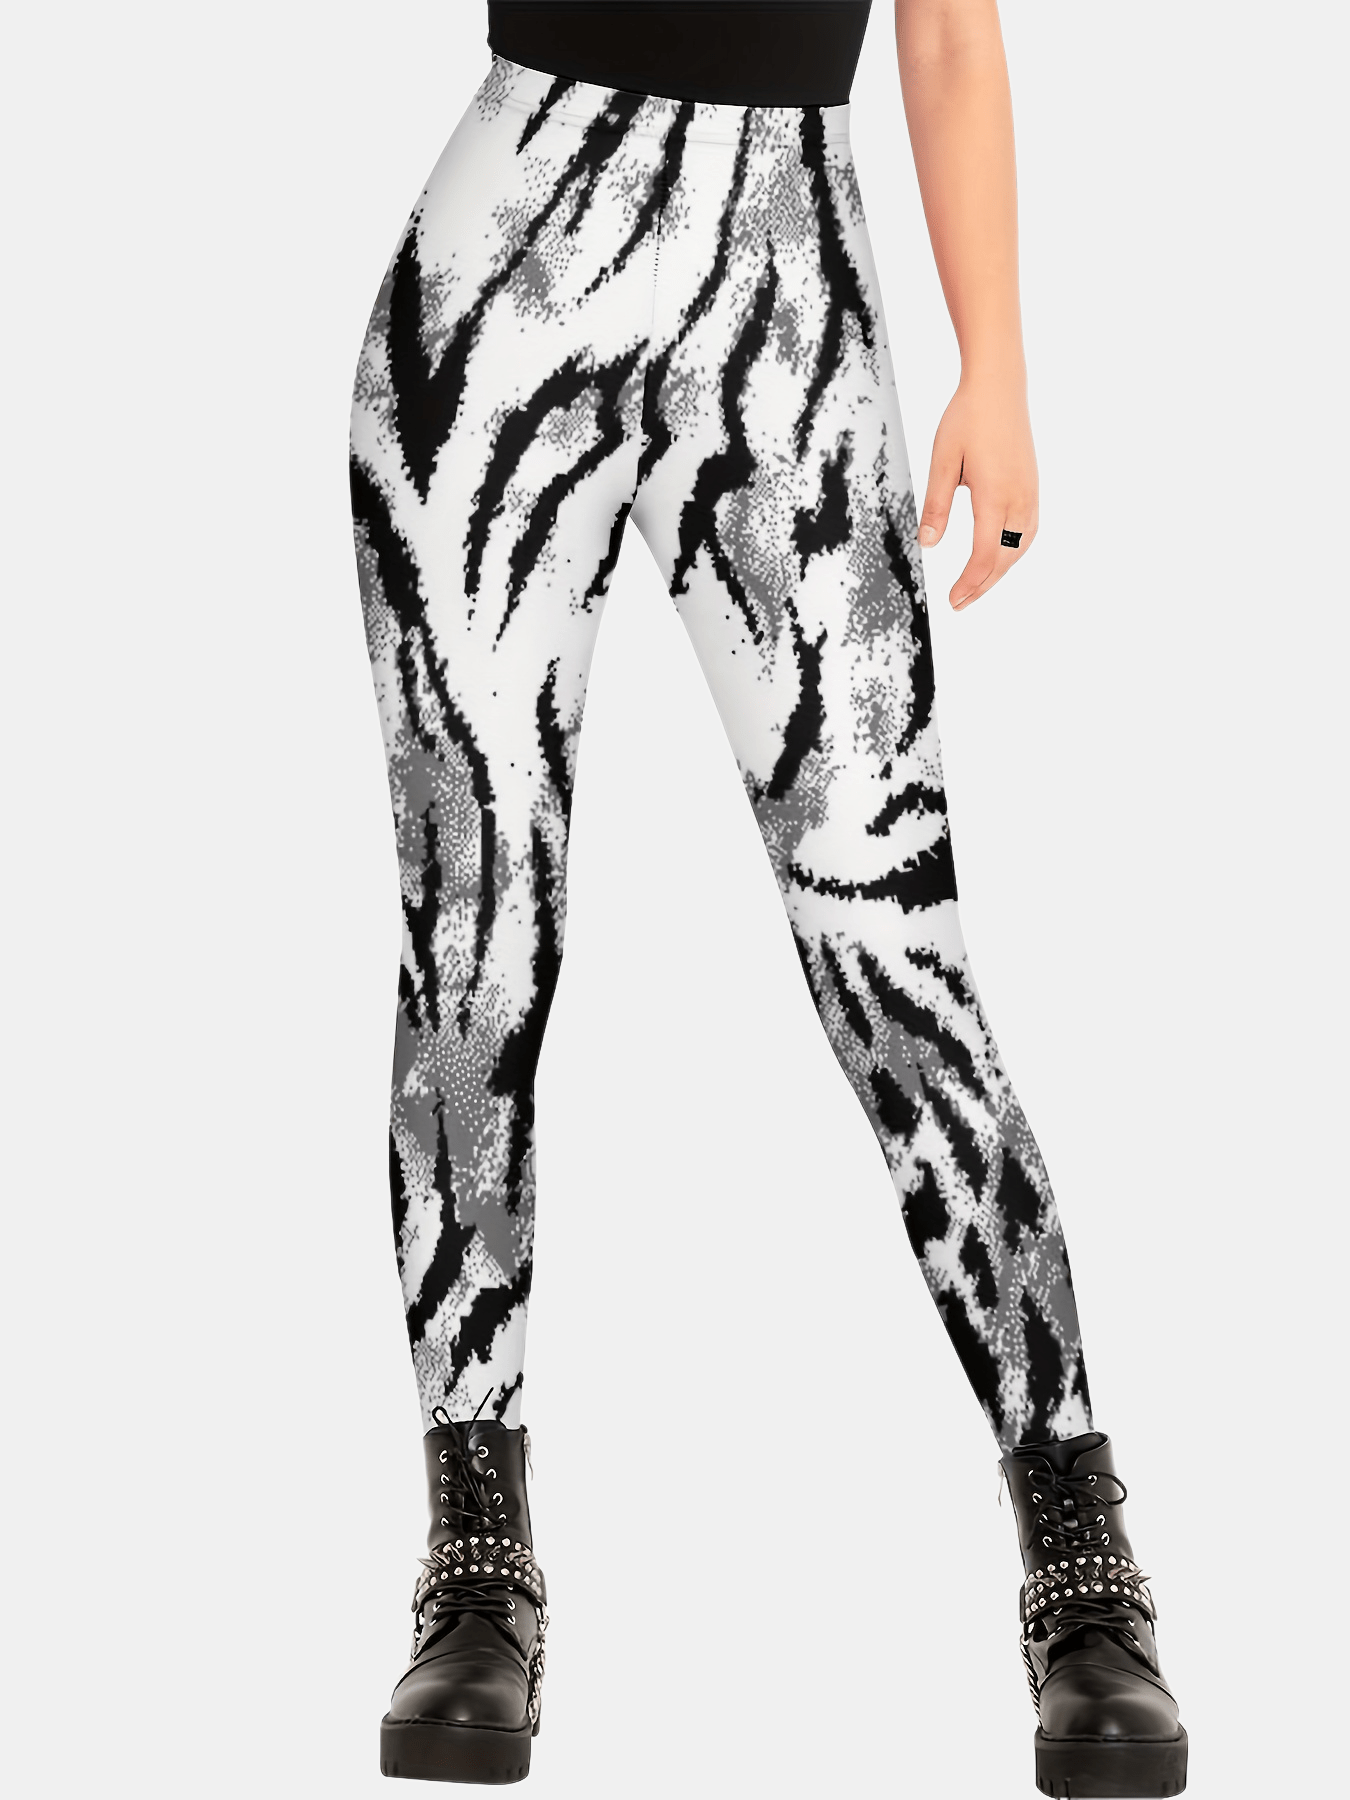 High Waist Zebra Print Leggings for Women - Stretchy, Butt Lifting, and  Perfect for Yoga, Fitness, and Running